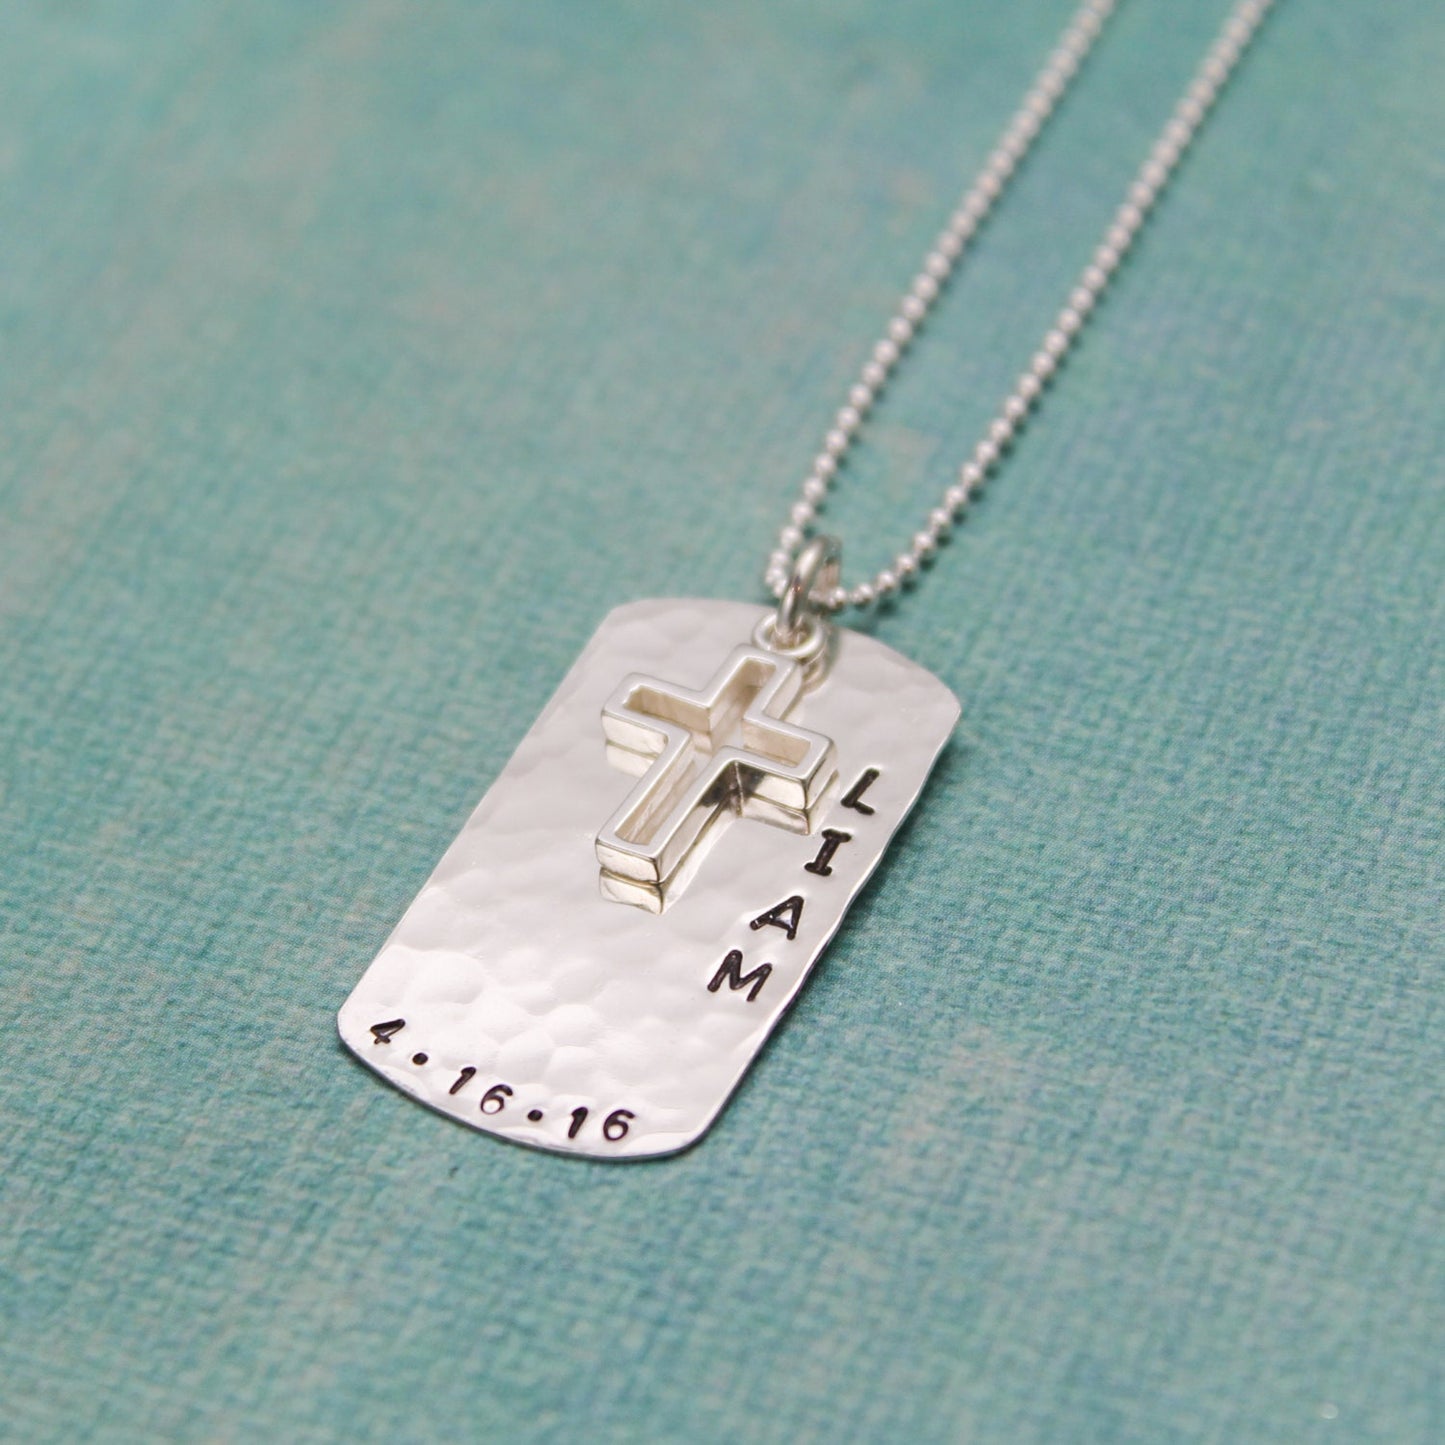 Personalized Boys Confirmation Necklace or First Communion Necklace, Personalized Dog Tag Cross Necklace, Hand Stamped Jewelry